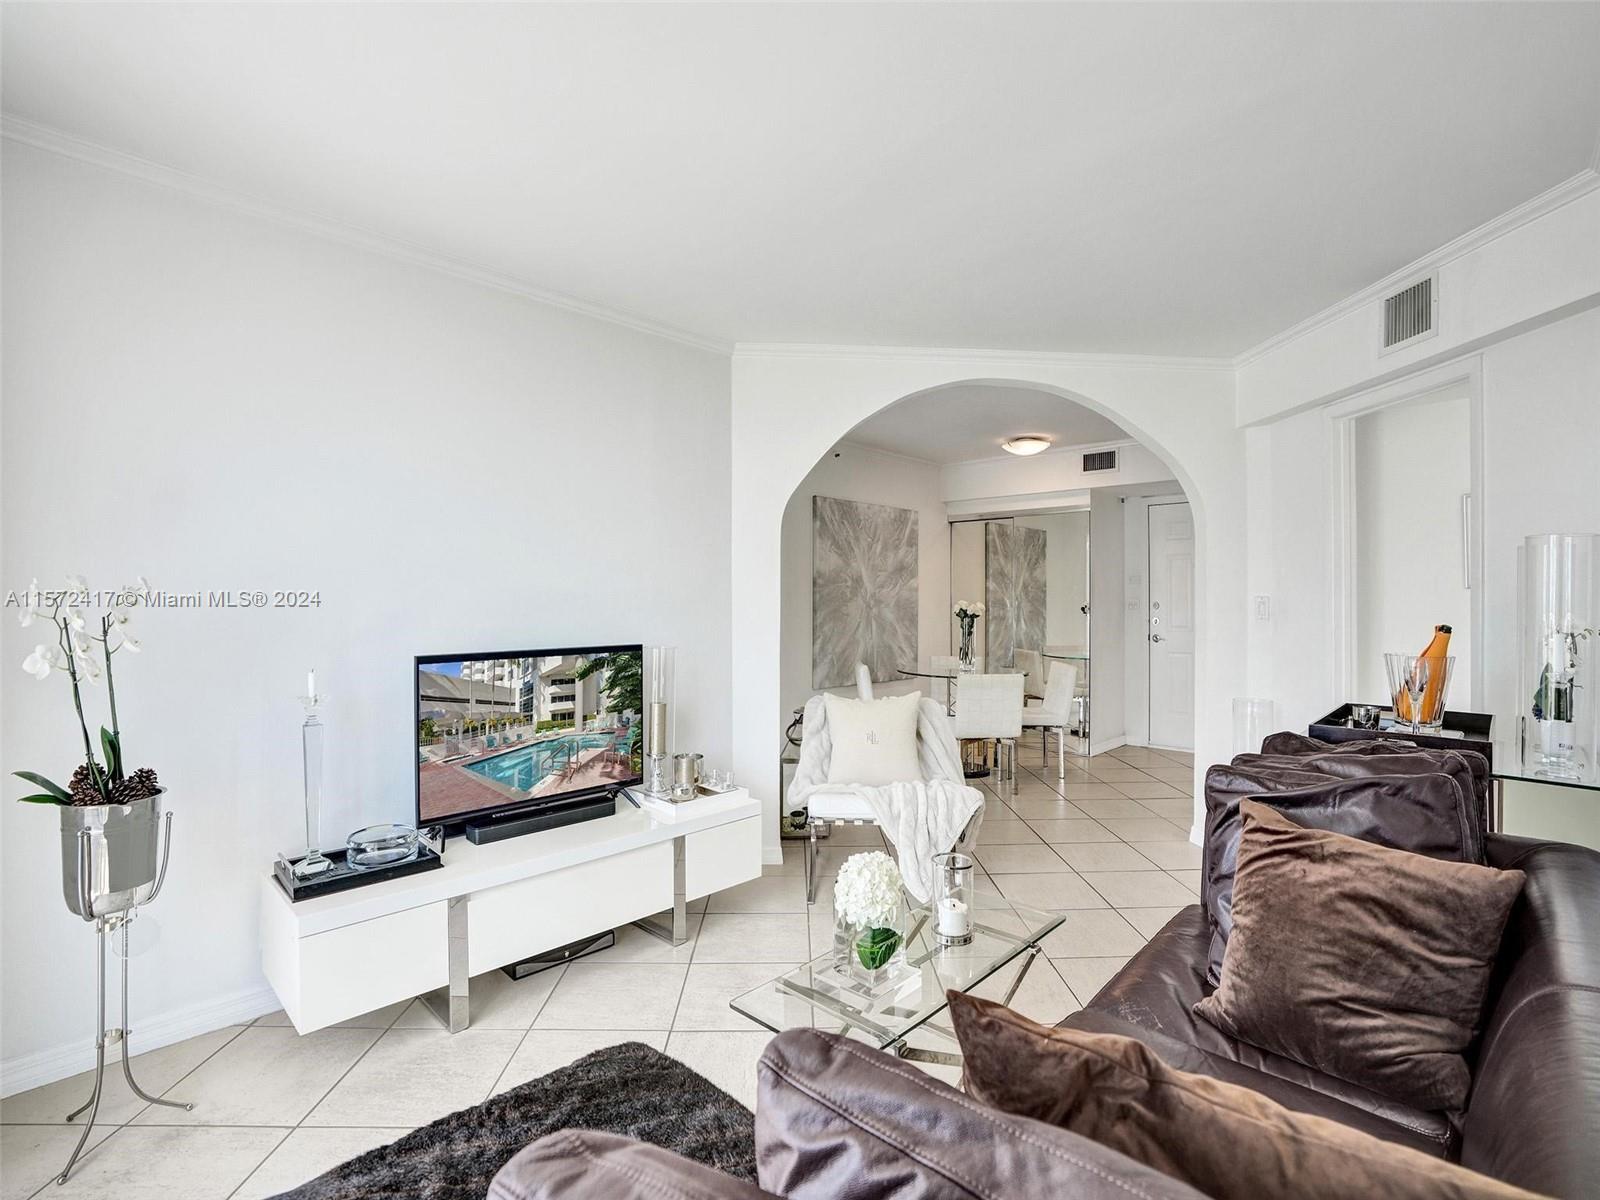 Welcome to your fully furnished 2-bedroom, 2-full bath unit in the heart of South Beach, offering a 